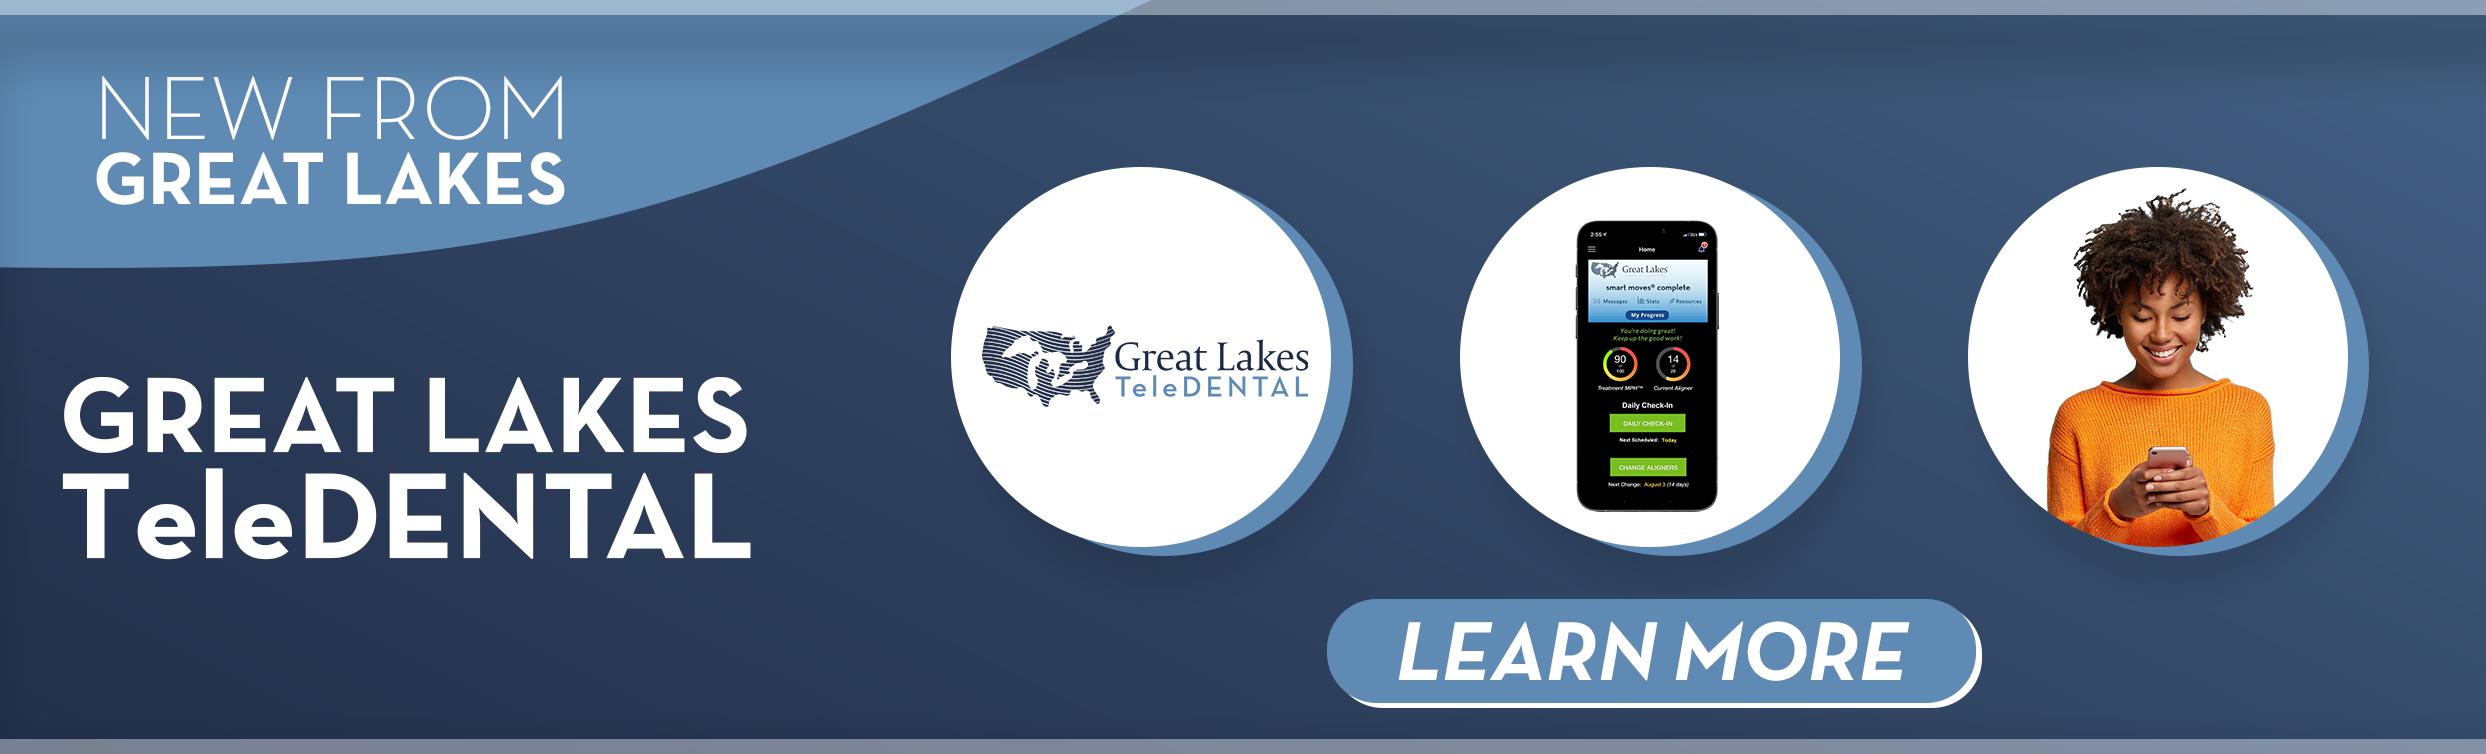 New from Great Lakes! Great Lakes TeleDENTAL is teledentistry for your evolving practice